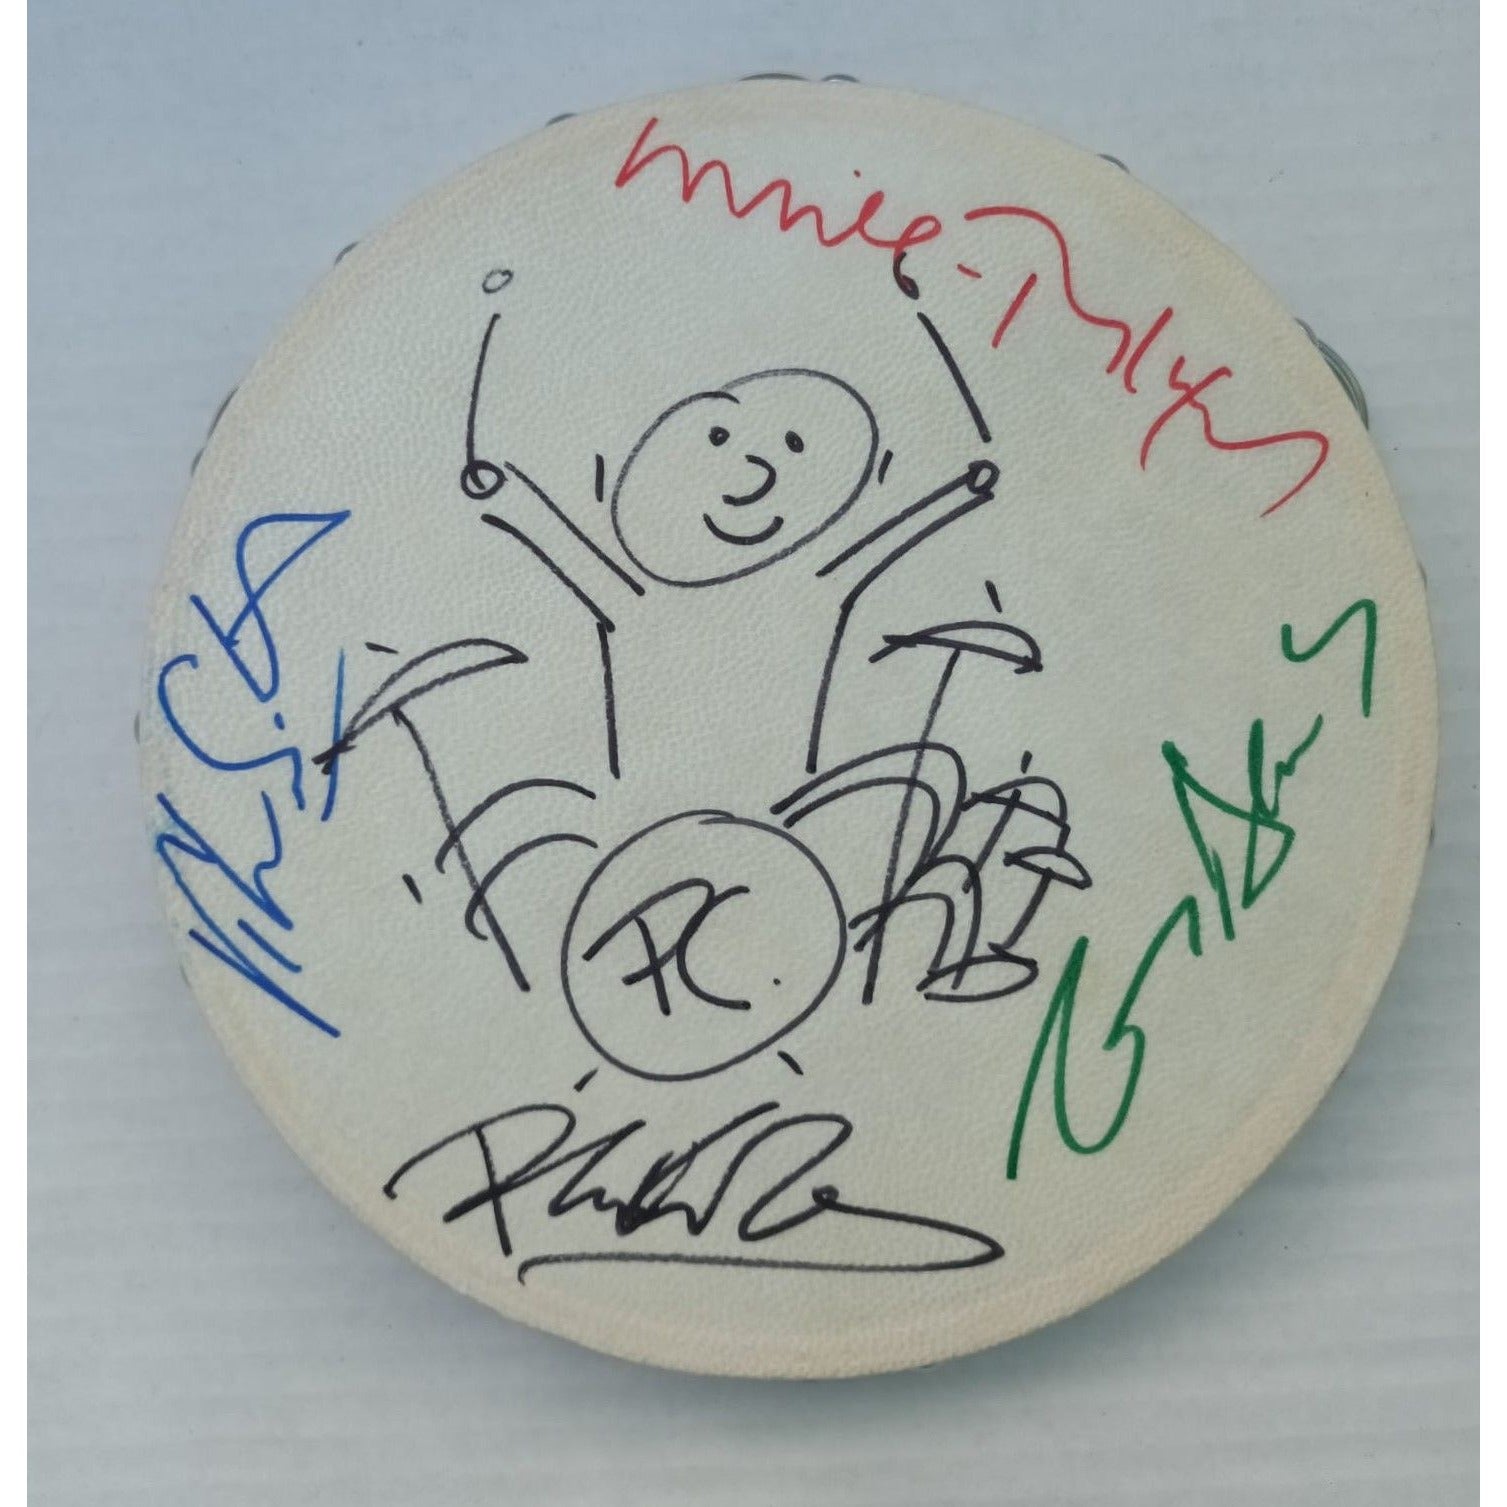 Phil Collins Peter Gabriel Tony Banks Mike Rutherford Genesis 10 inch tambourine signed with proof